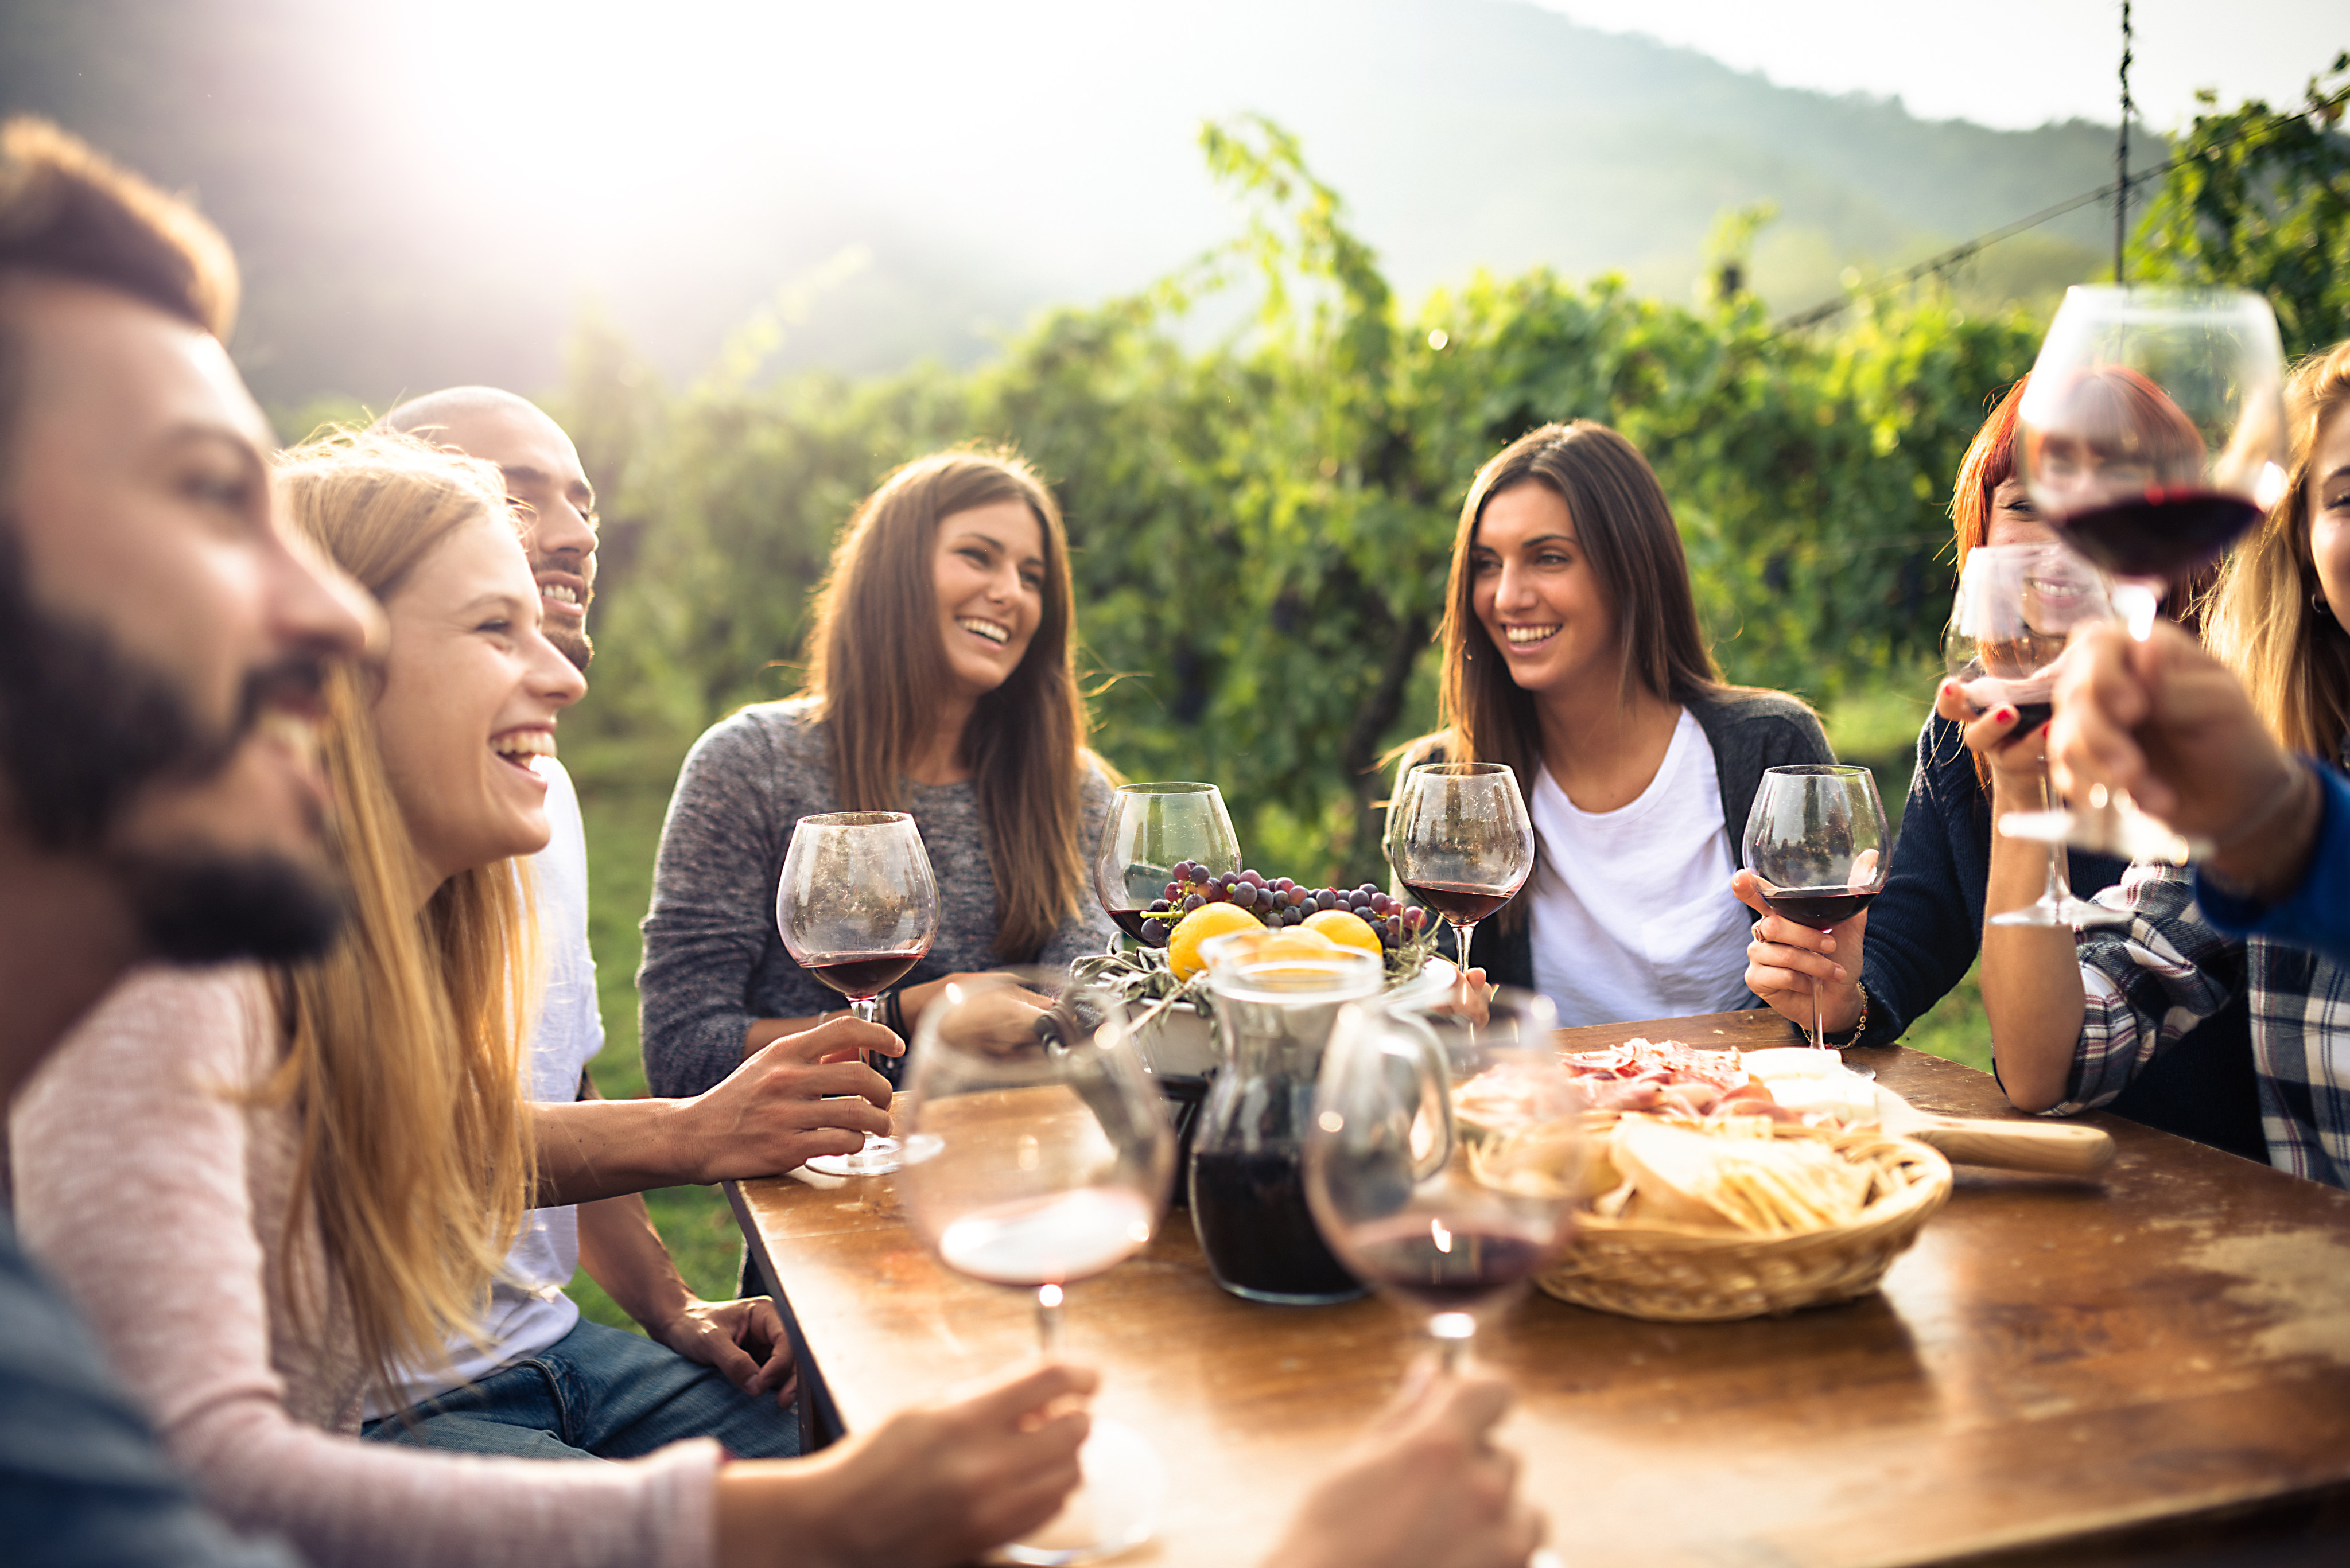 A group of people enjoying a tipple. Non-alcoholic drinks are ‘in’, but does this mean real wine and cocktails are on their way out? Photo: Getty Images